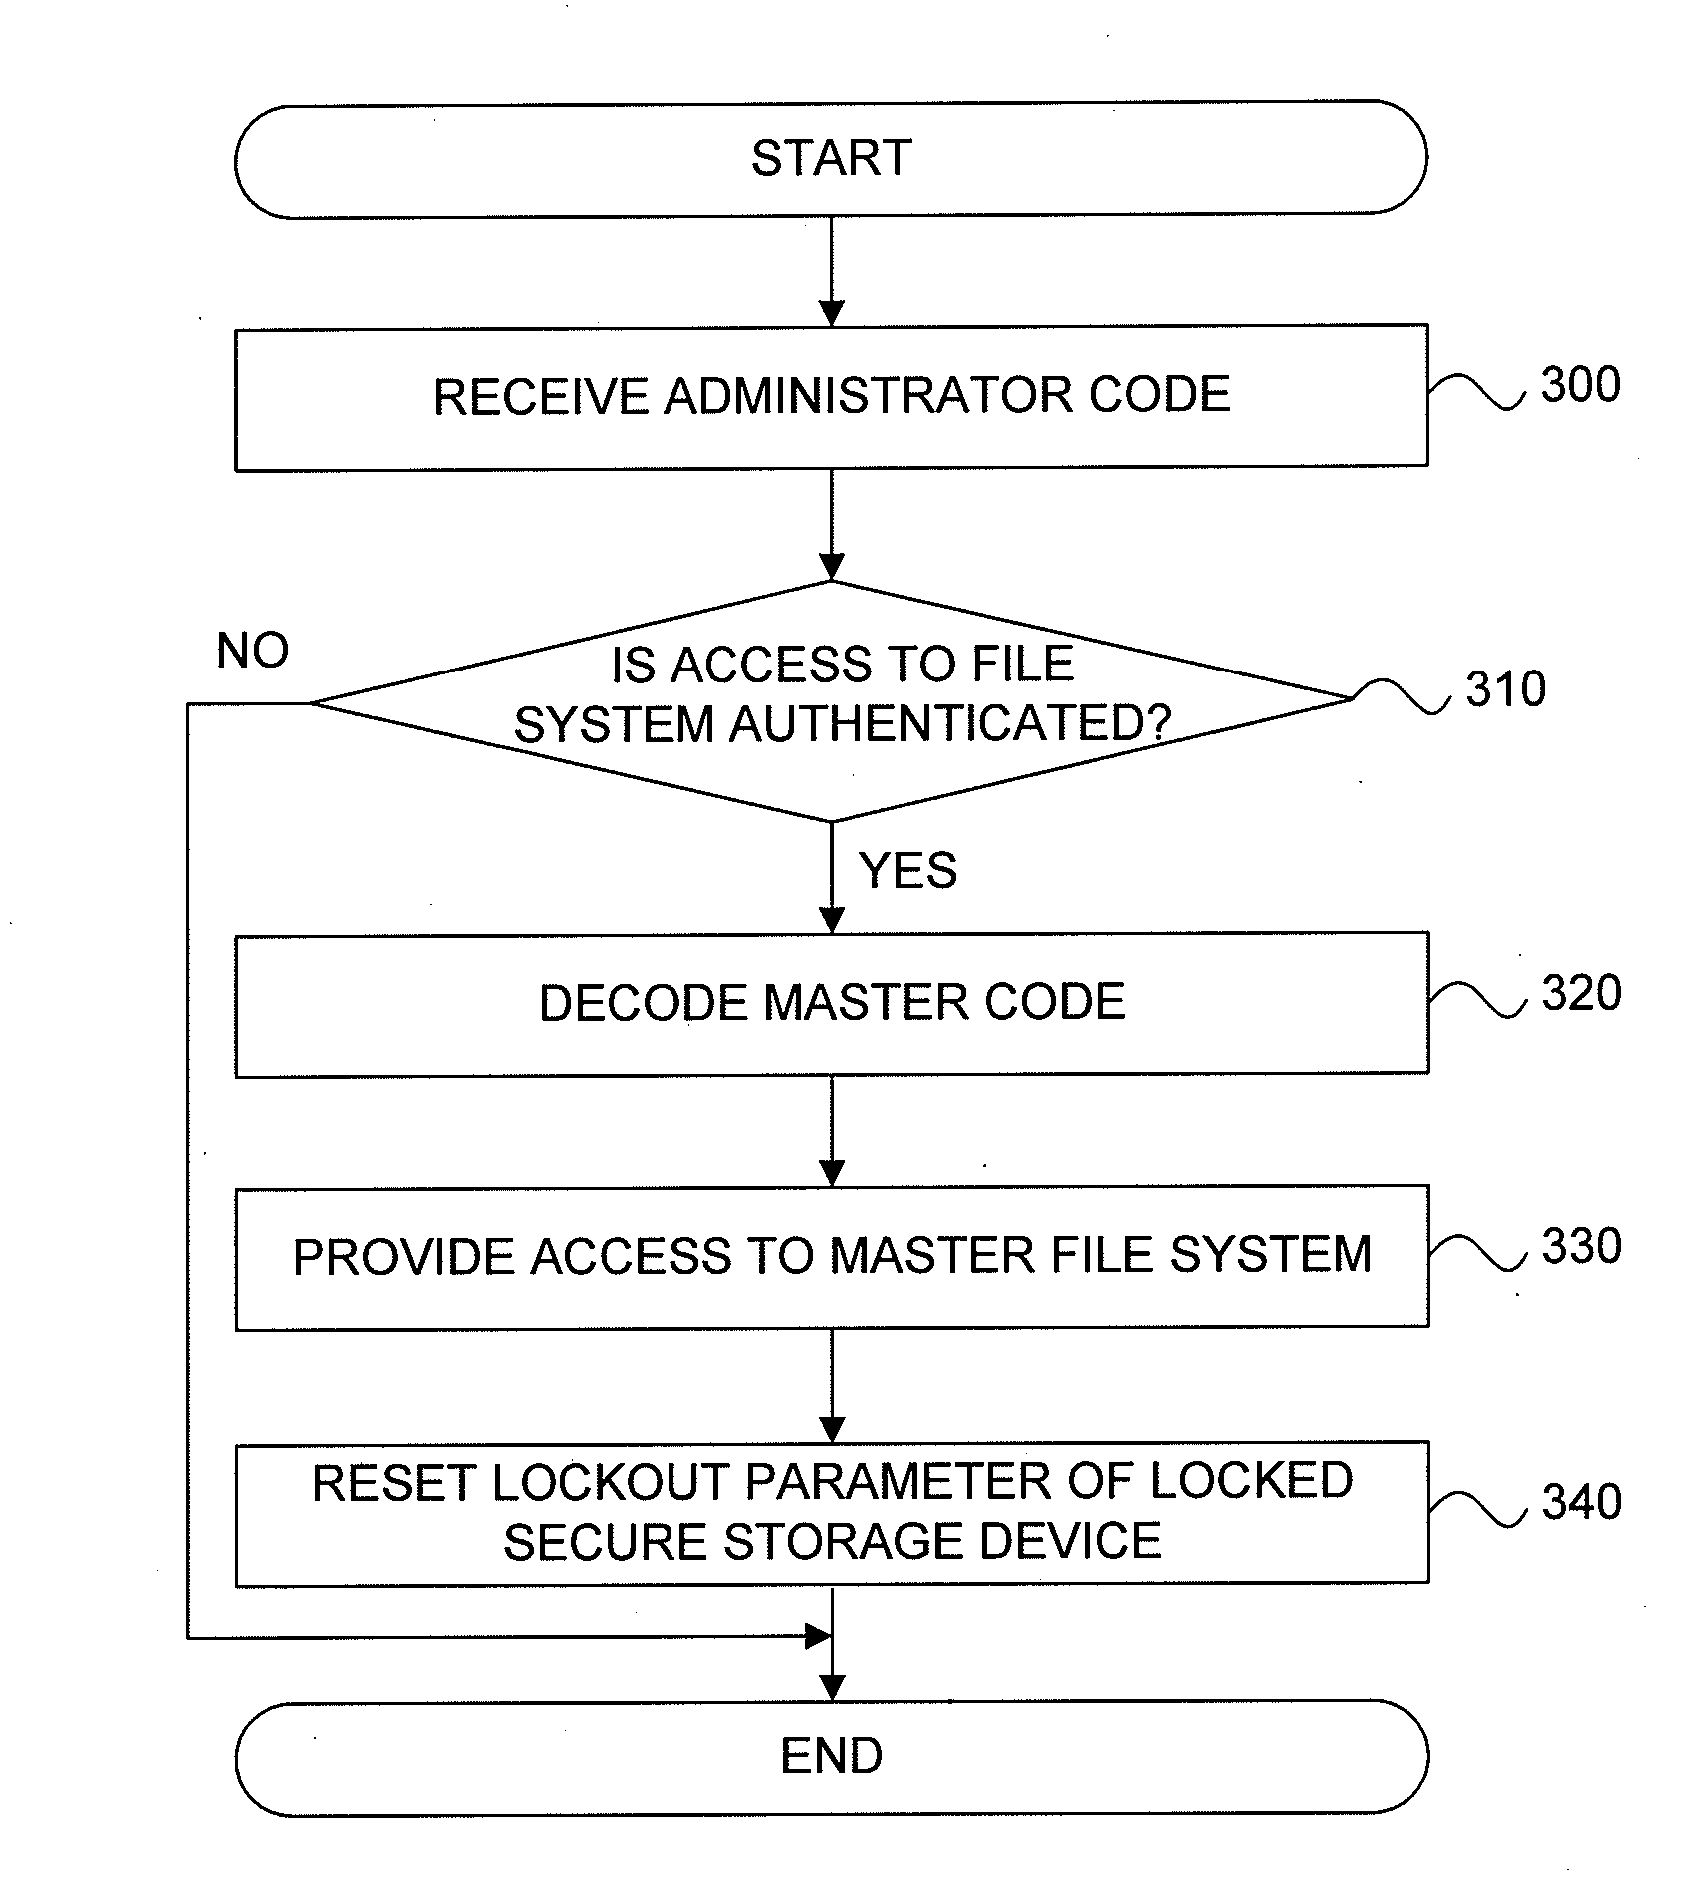 Recovery of Data Access for a Locked Secure Storage Device